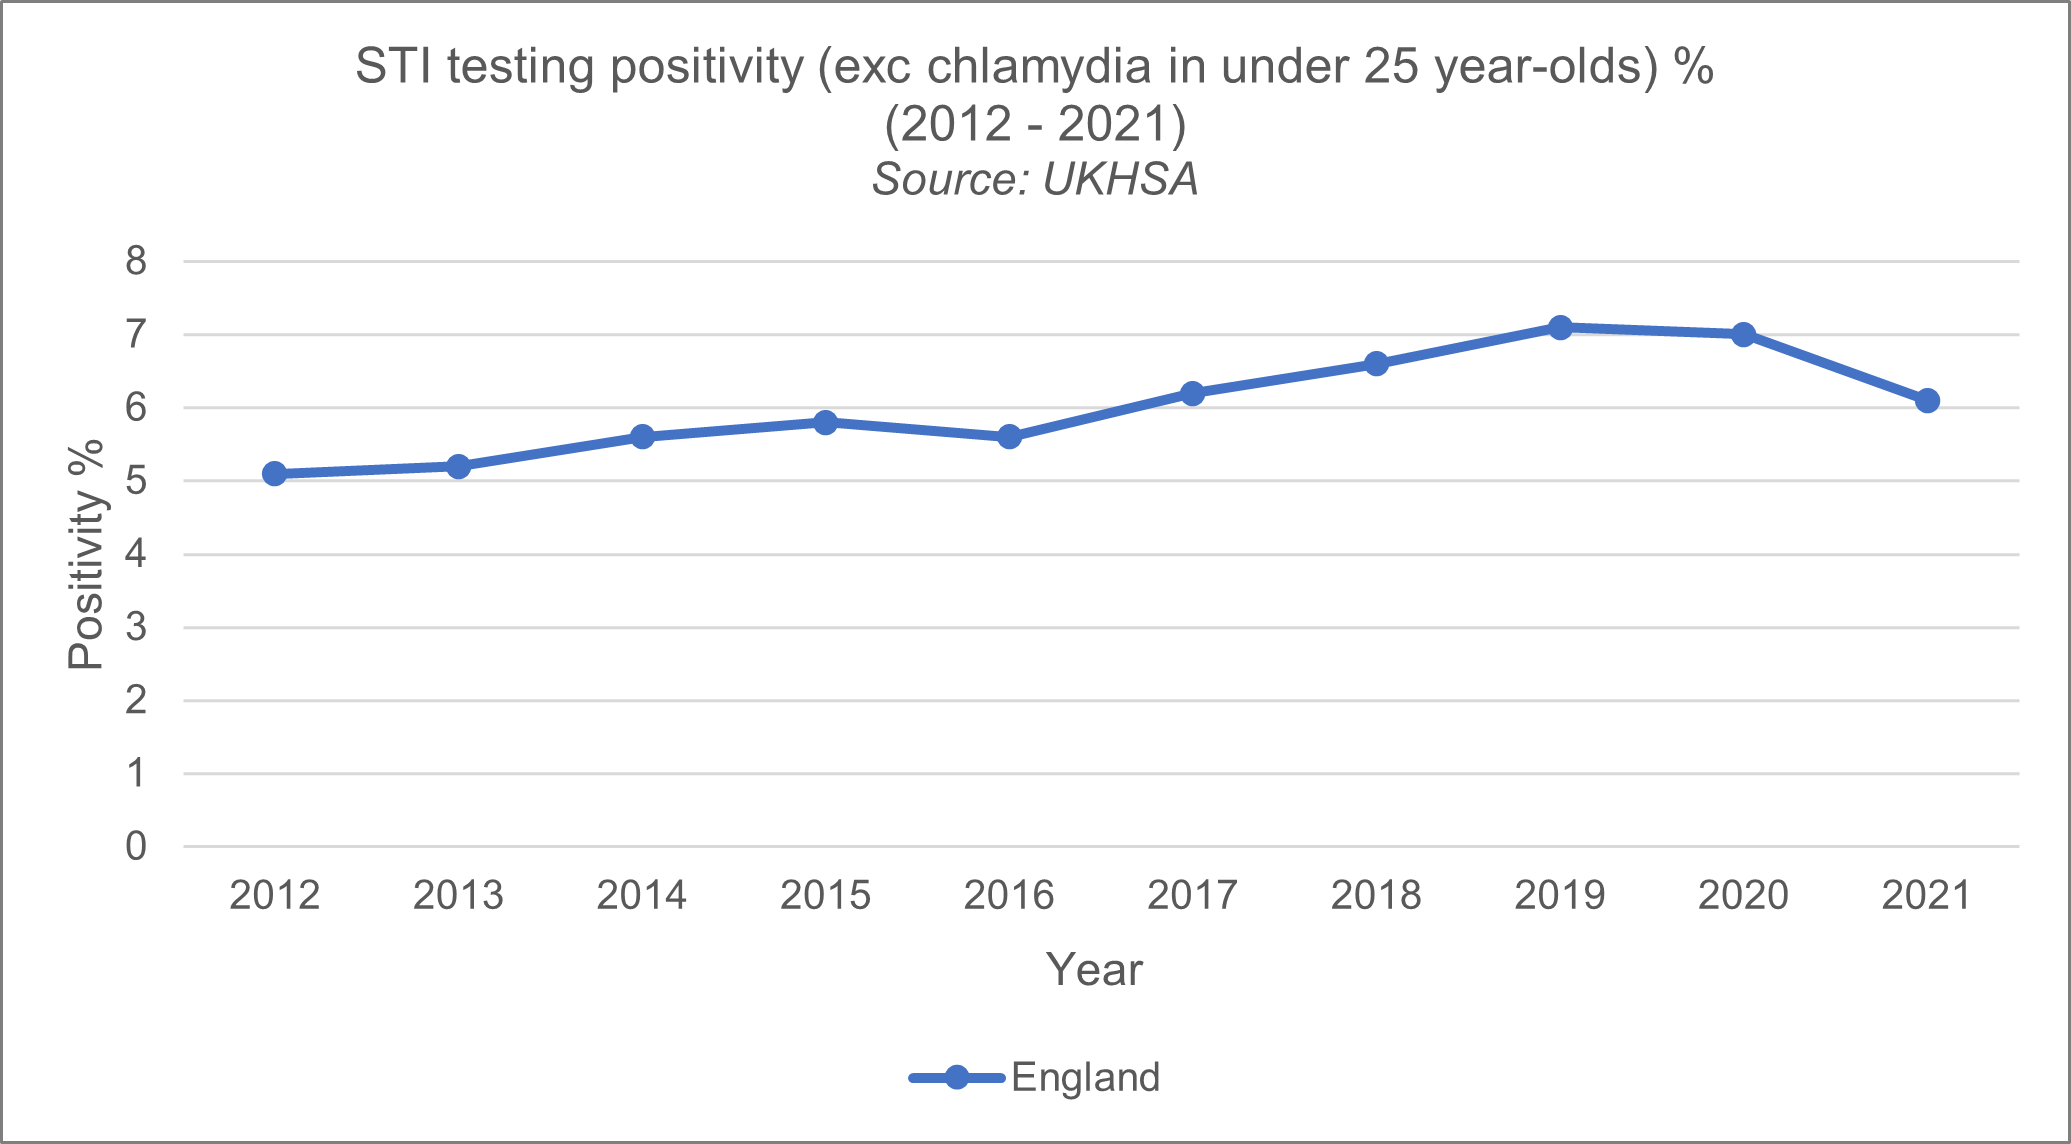 There was an increase in the percentage of STI tests returning as positive (excluding chlamydia in under 25 year olds) 2012 and 2021. In 2012, the testing positivity was 5.1%, increasing to 7.1% in 2019 and falling to 6.1% by 2021. 